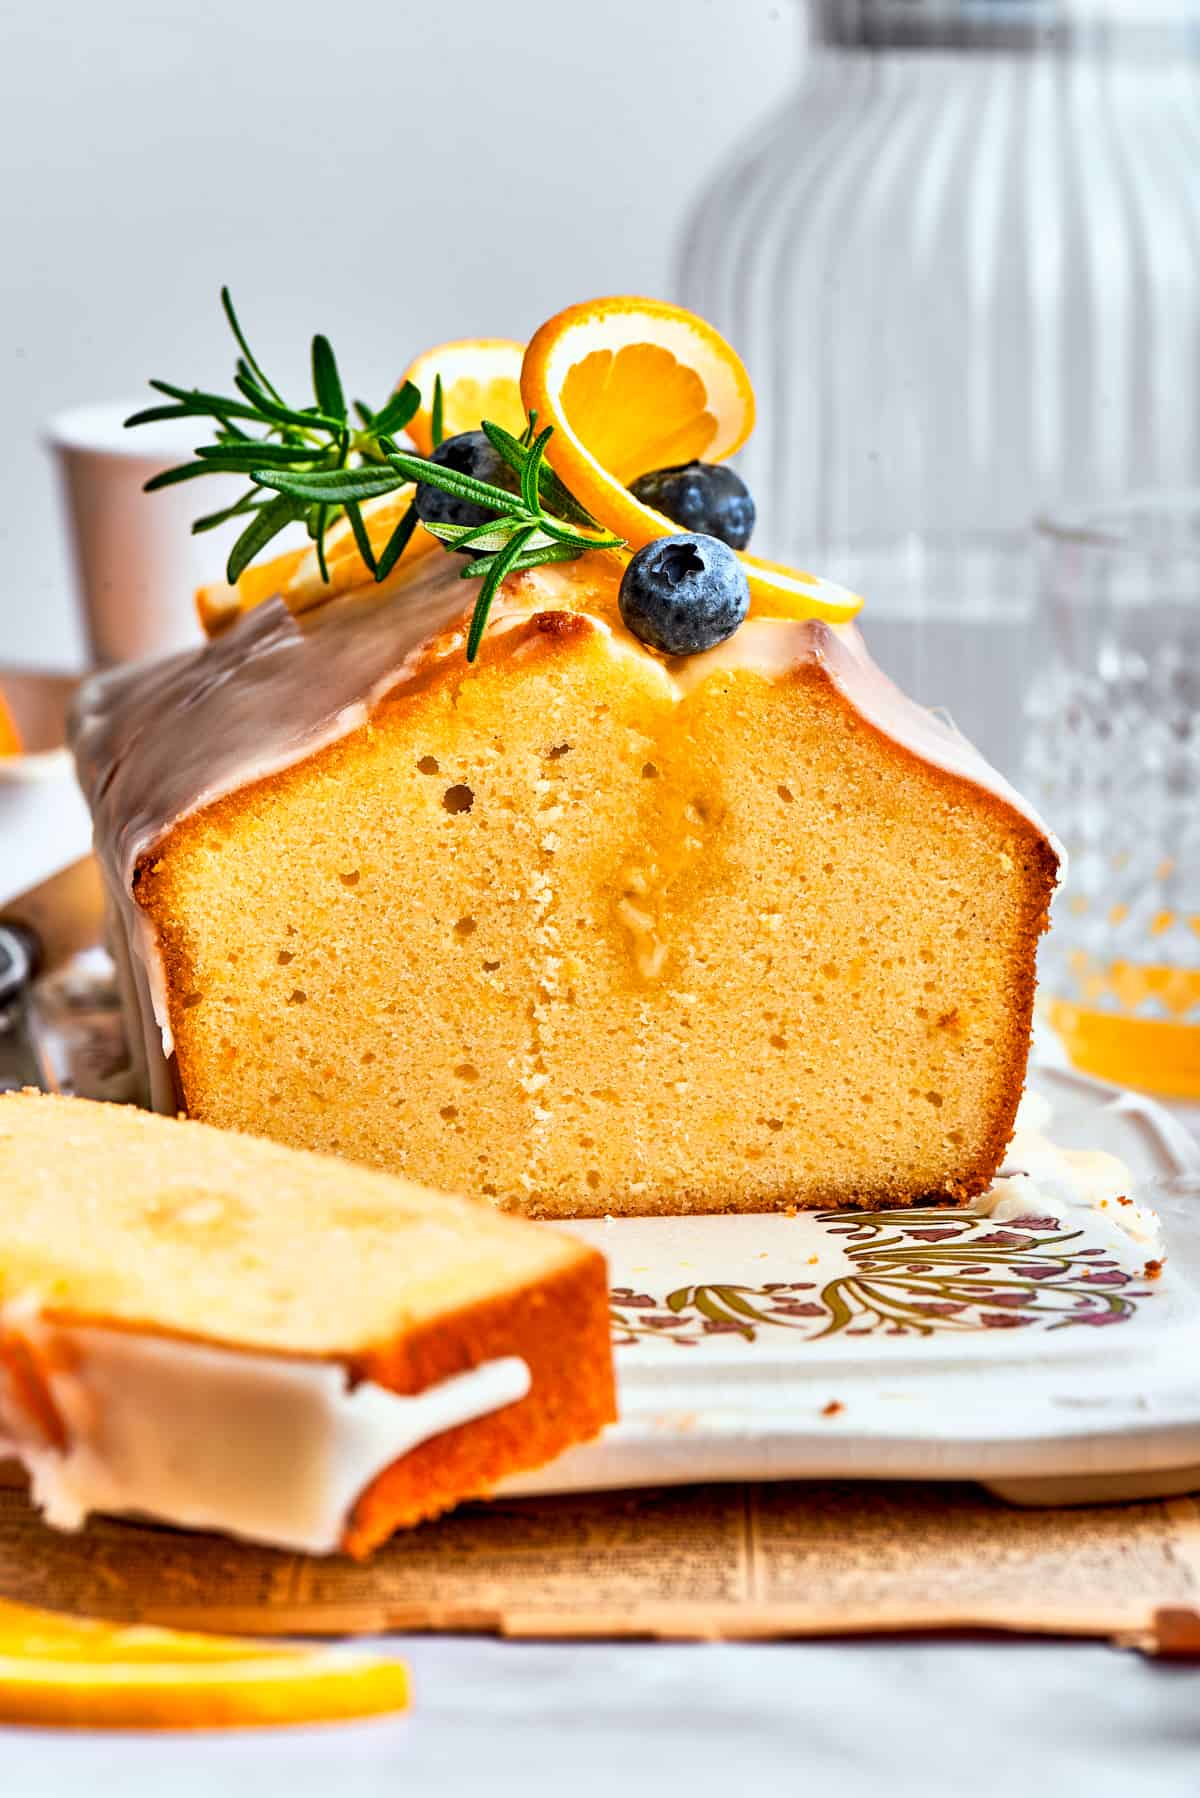 A side view of a slice of orange cake and the entire loaf, topped with blueberries, fresh rosemary, and orange slices.